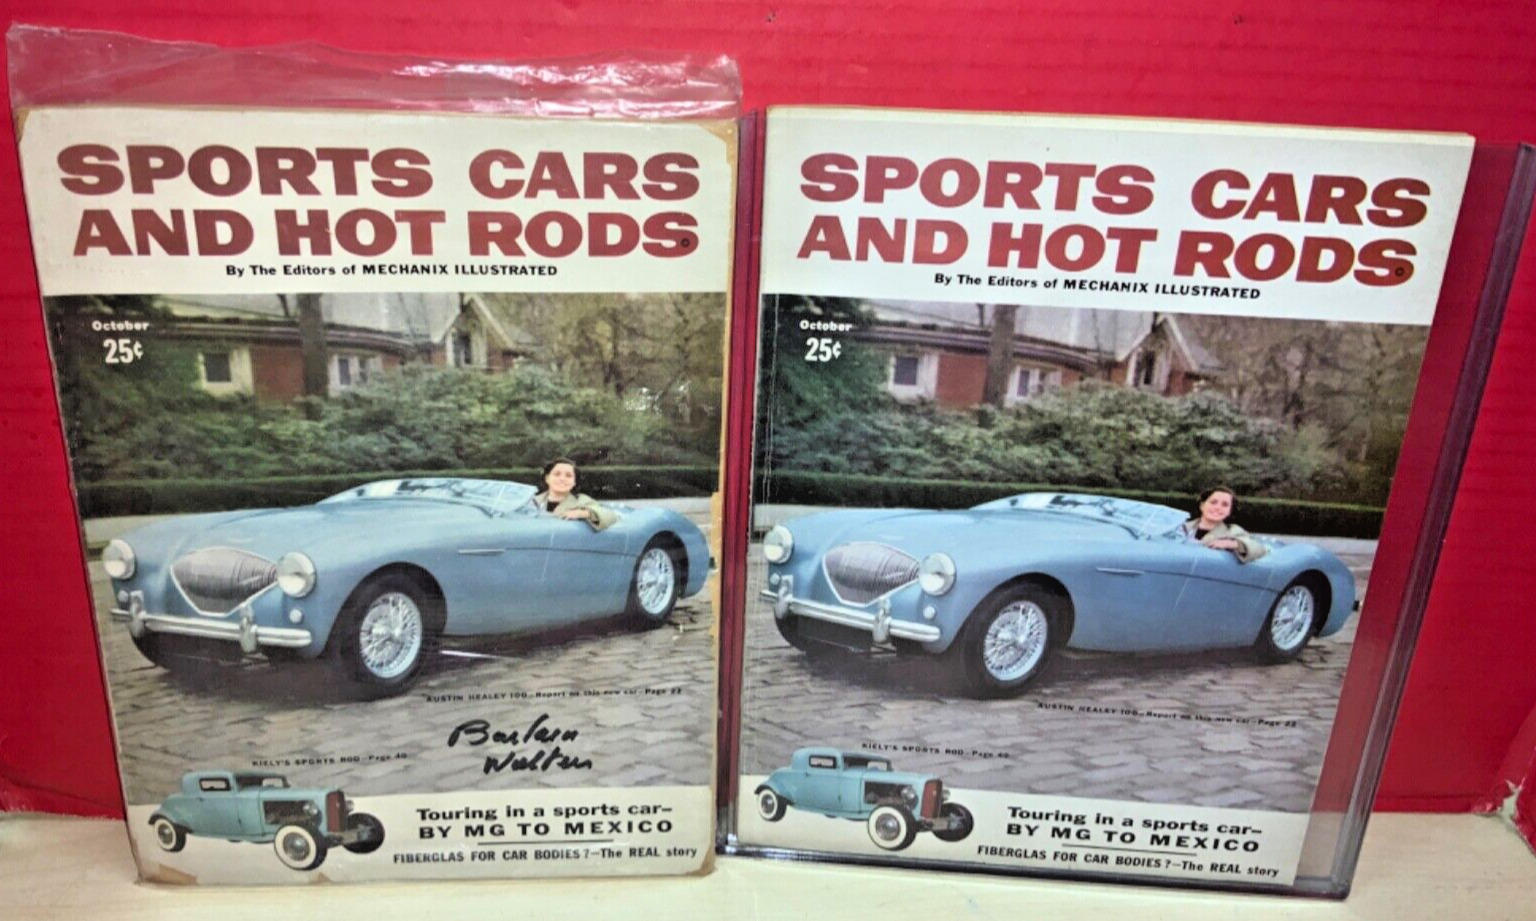 Sports Cars And Hot Rods By The Editors of MECHANIX ILLUSTRATED (Lot of 2)